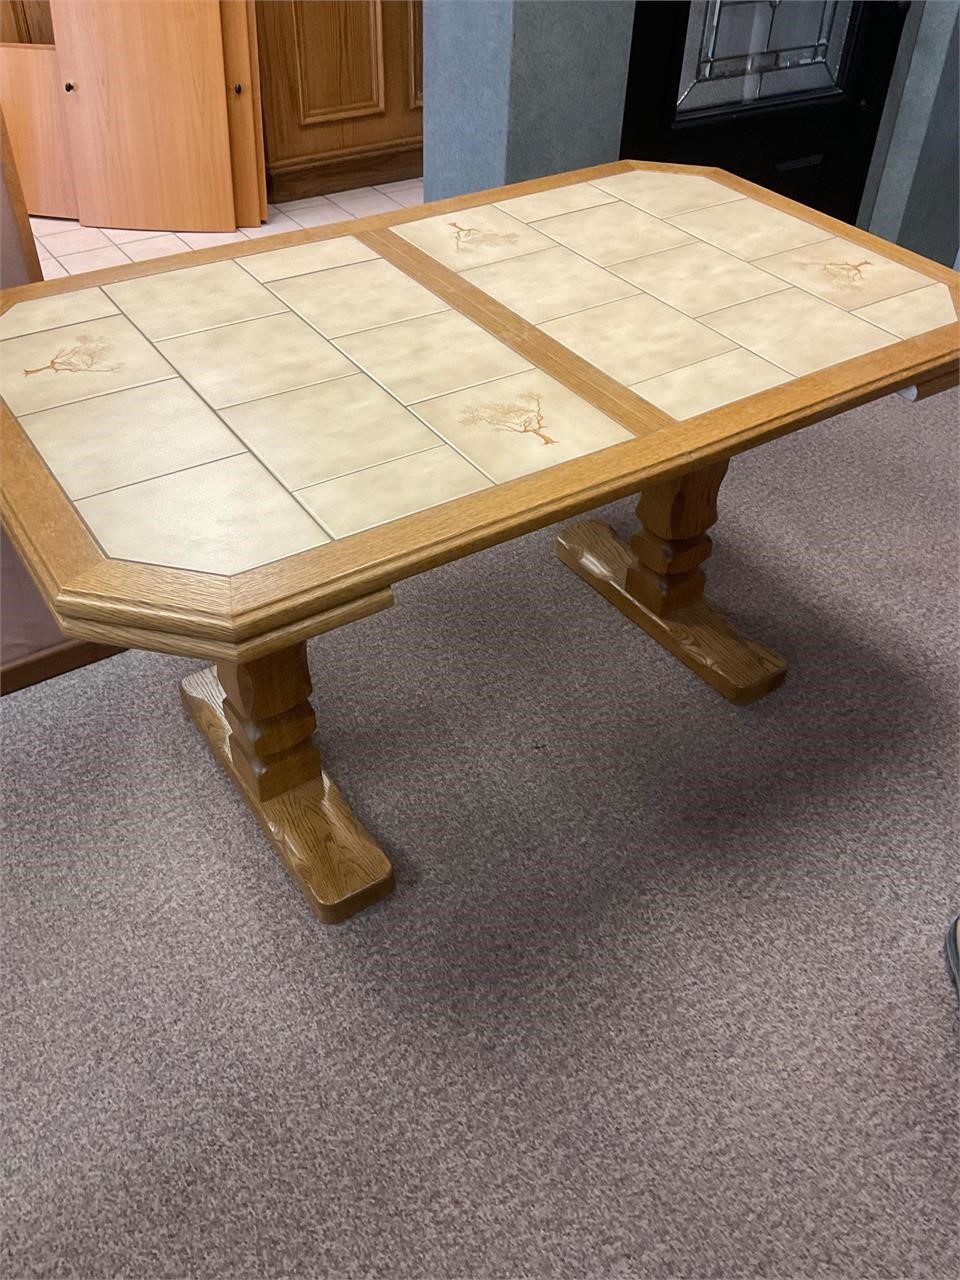 Stunning antique solid wood tile top dinning table